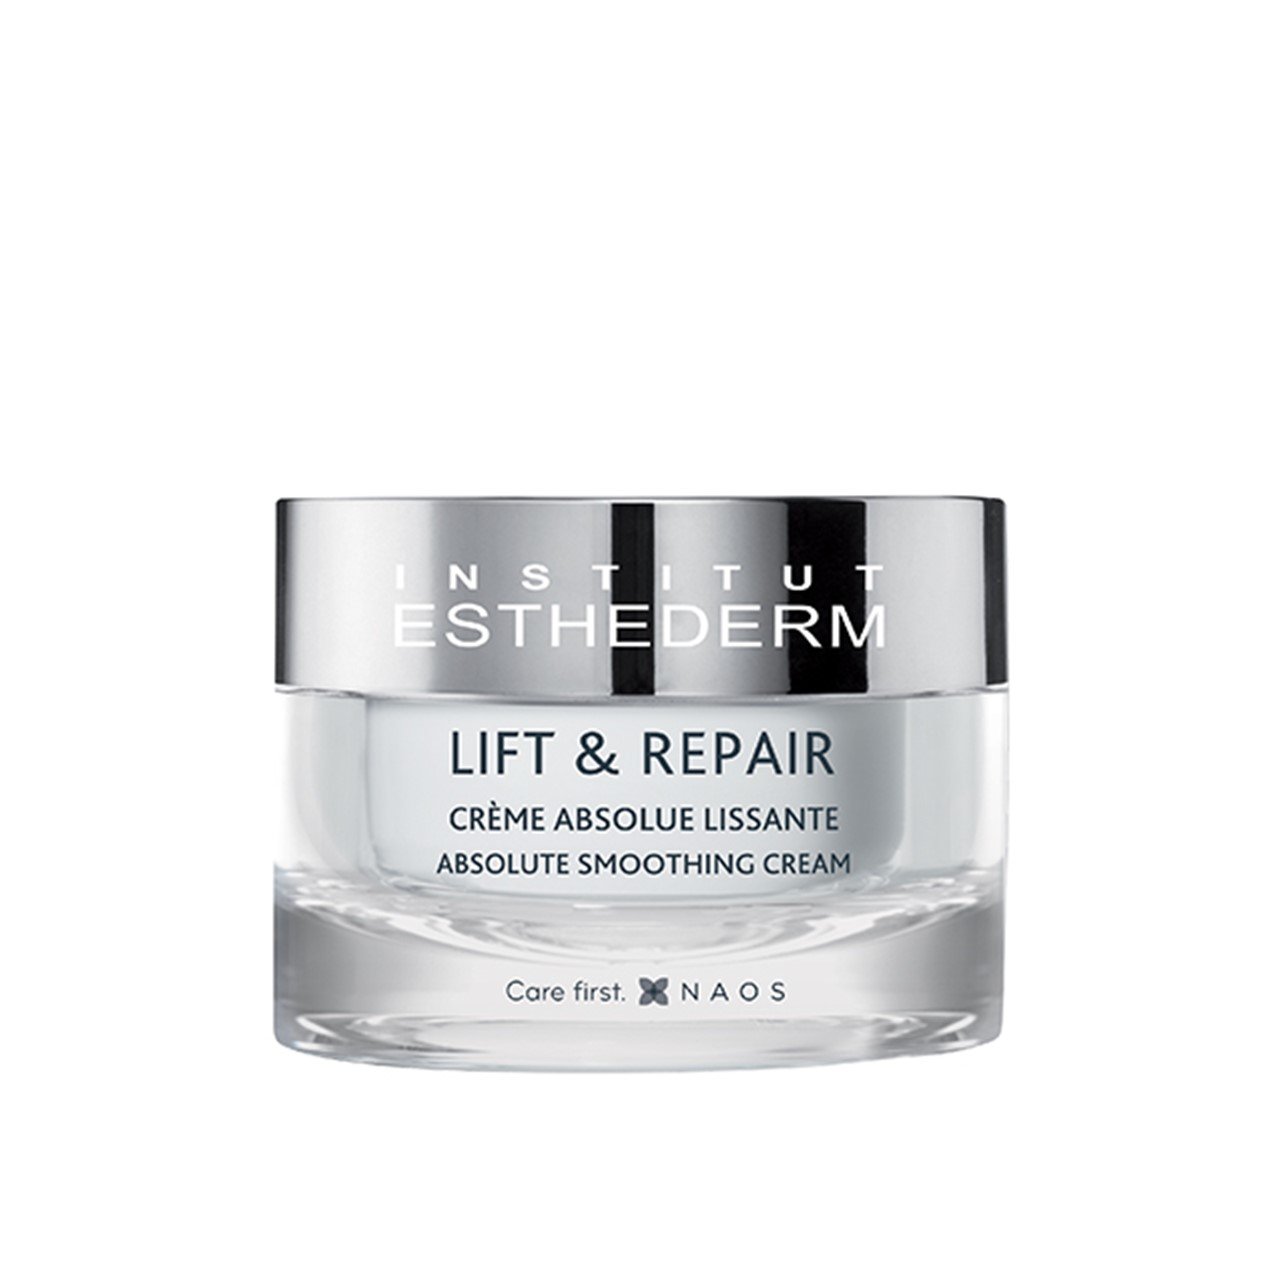 Esthederm Lift & Repair Absolute Smoothing Cream 50ml